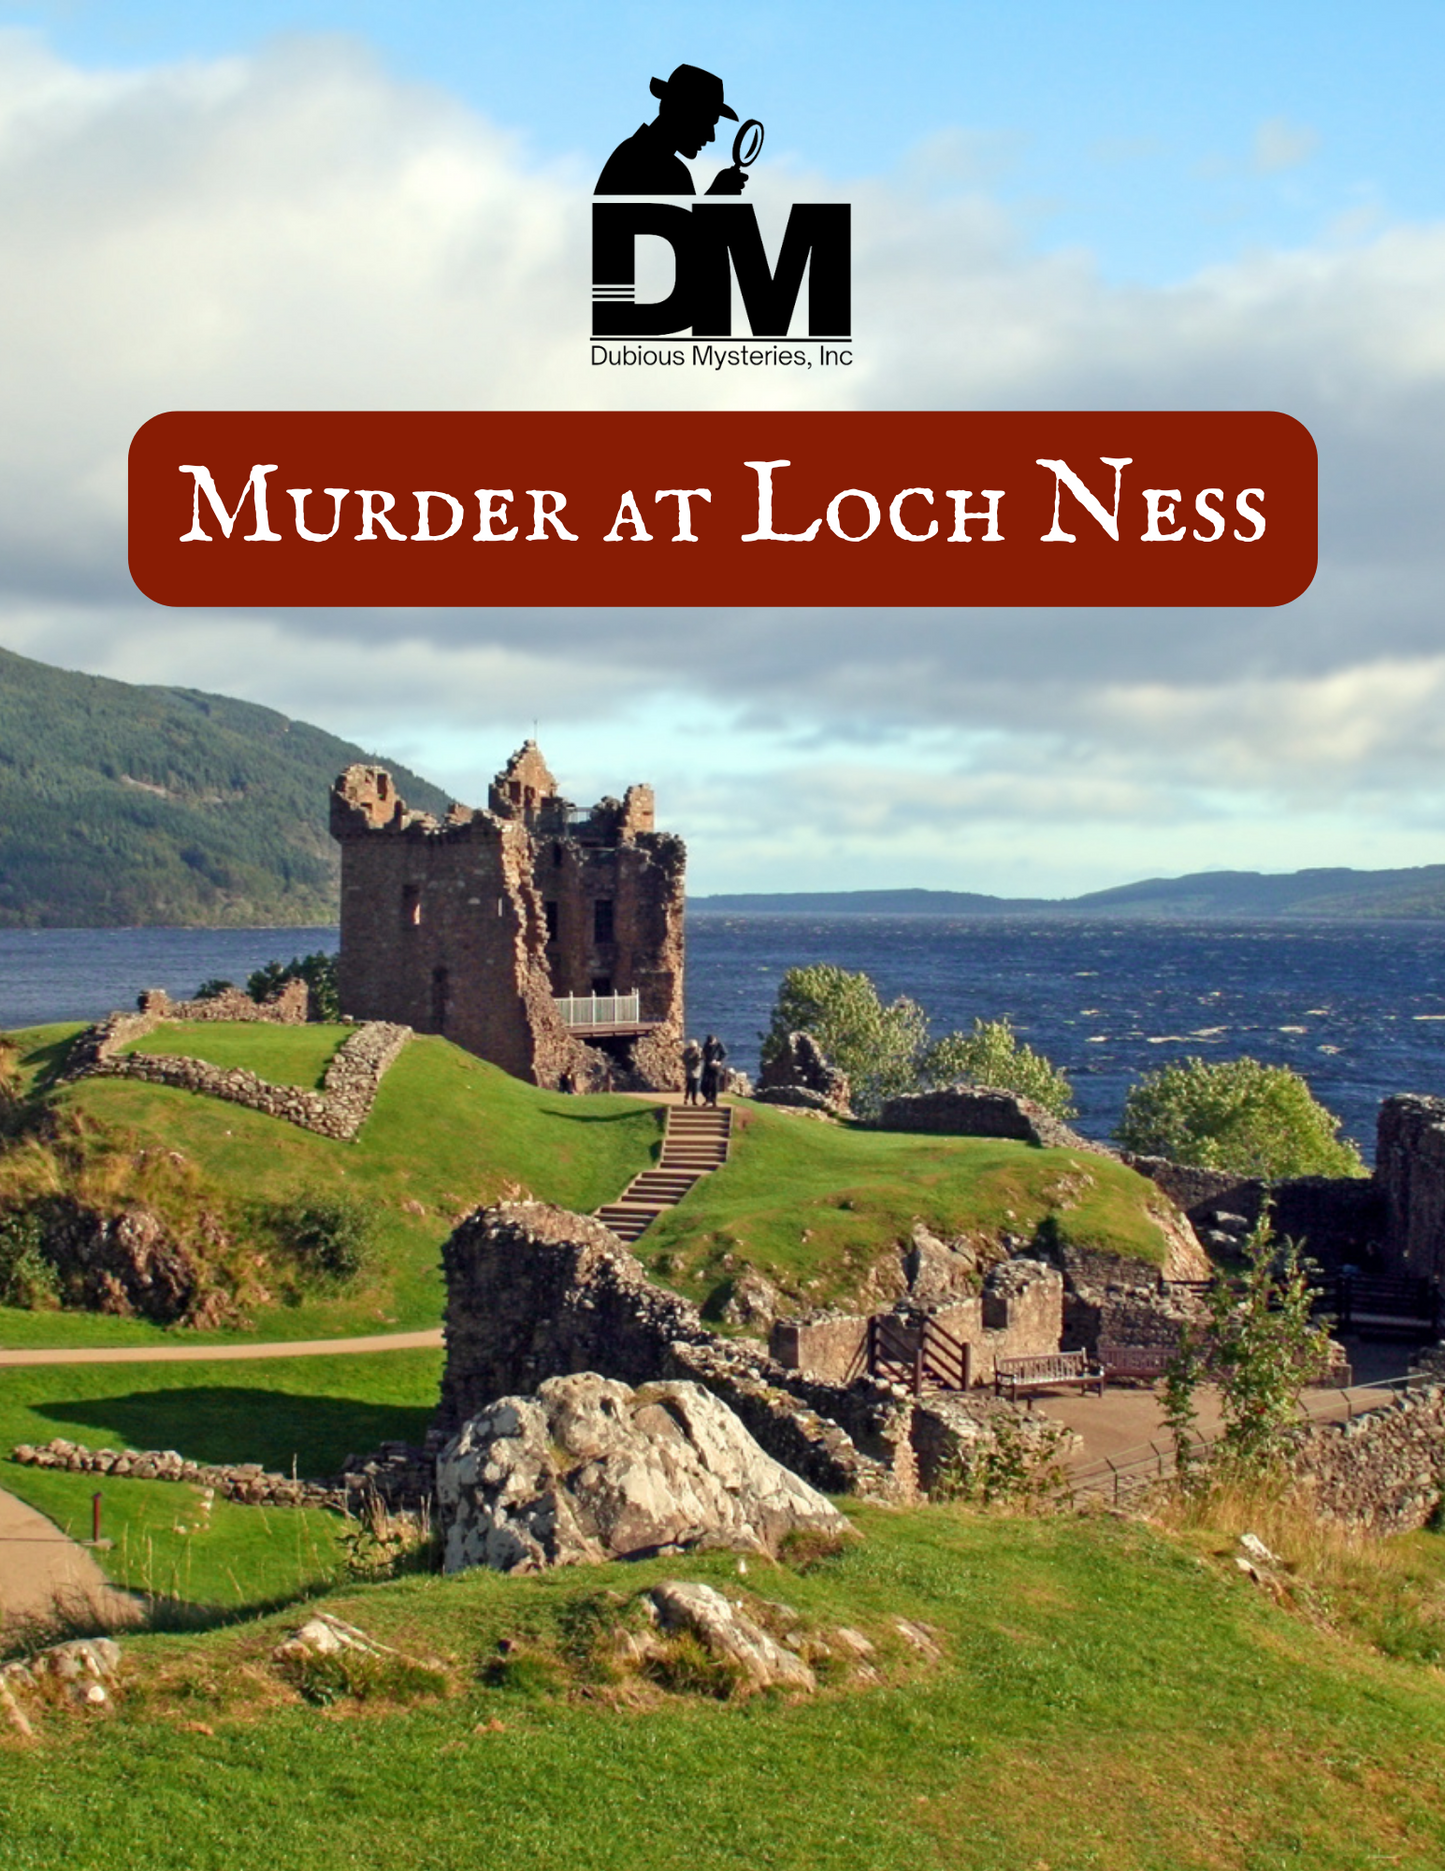 Murder on Loch Ness - 50% off GRAND OPENING SALE! - Downloadable, Printable Murder Mystery Role Playing Suspect Game